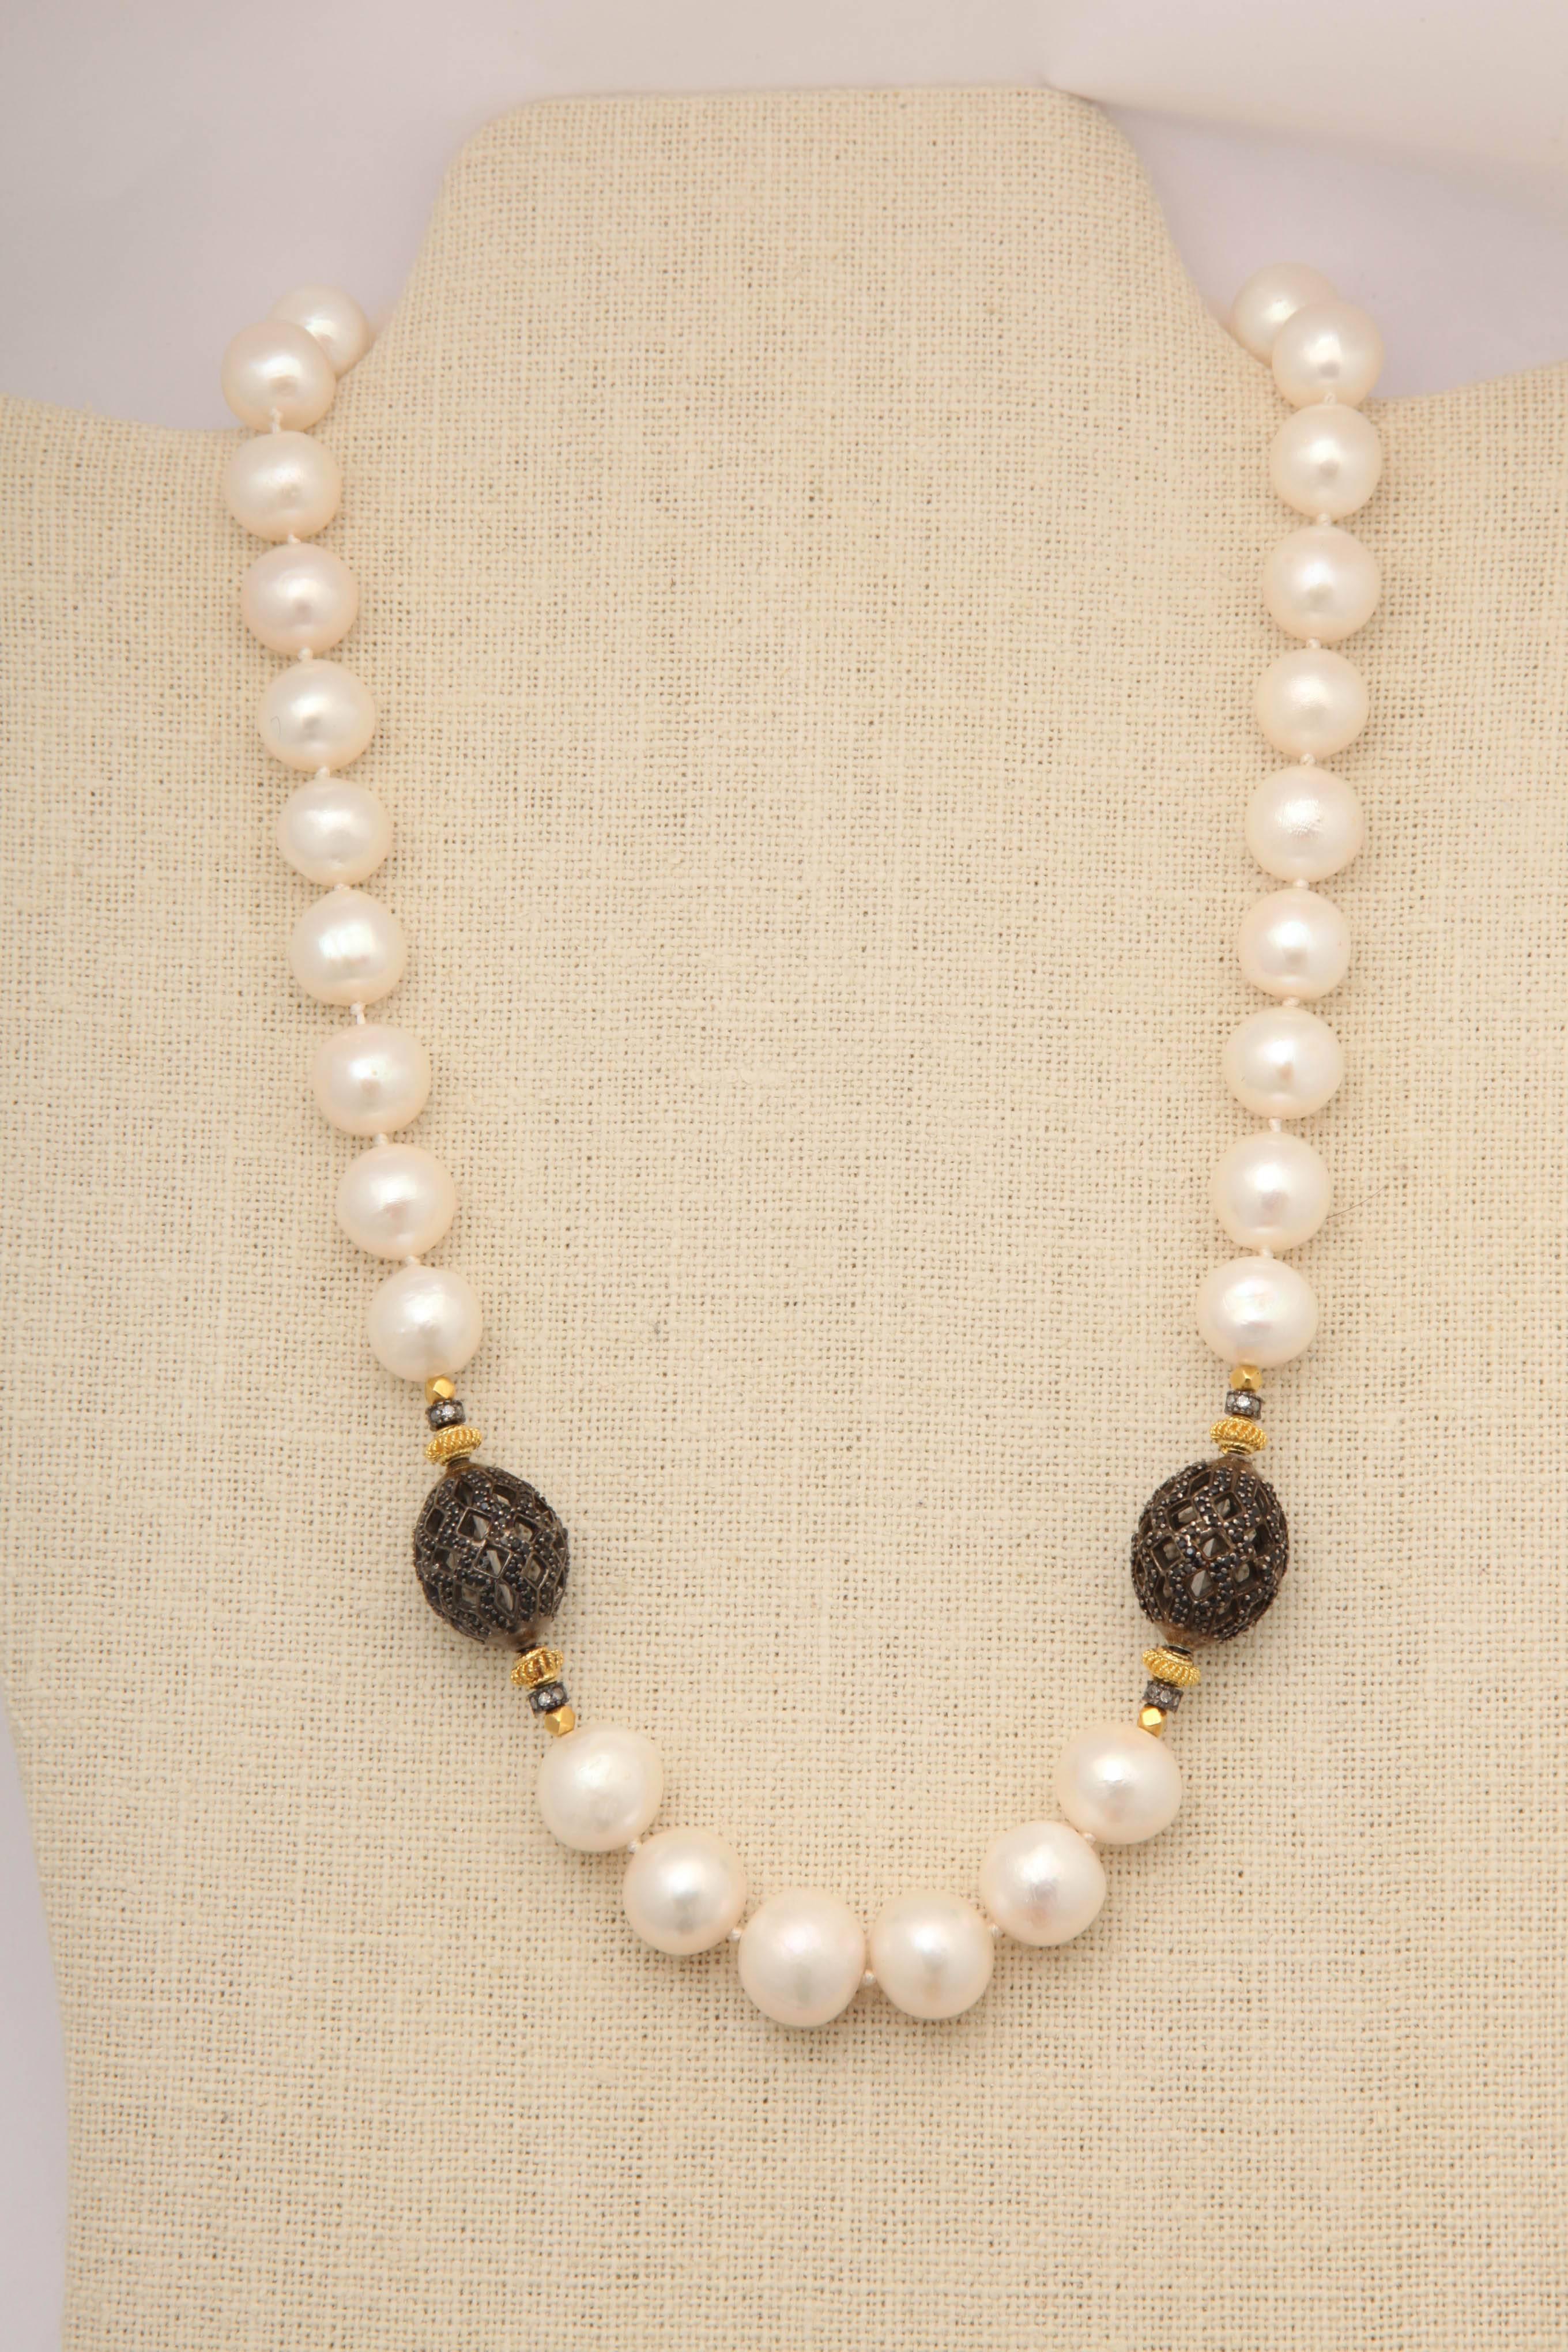 Fabulous 12-13 mm fresh water pearl necklace with faceted black spinels pave set in intricately cut silver oval beads. On either side of the silver spinel beads are 18 kt gold beads and silver and diamond rondeles. The necklace is finished with a